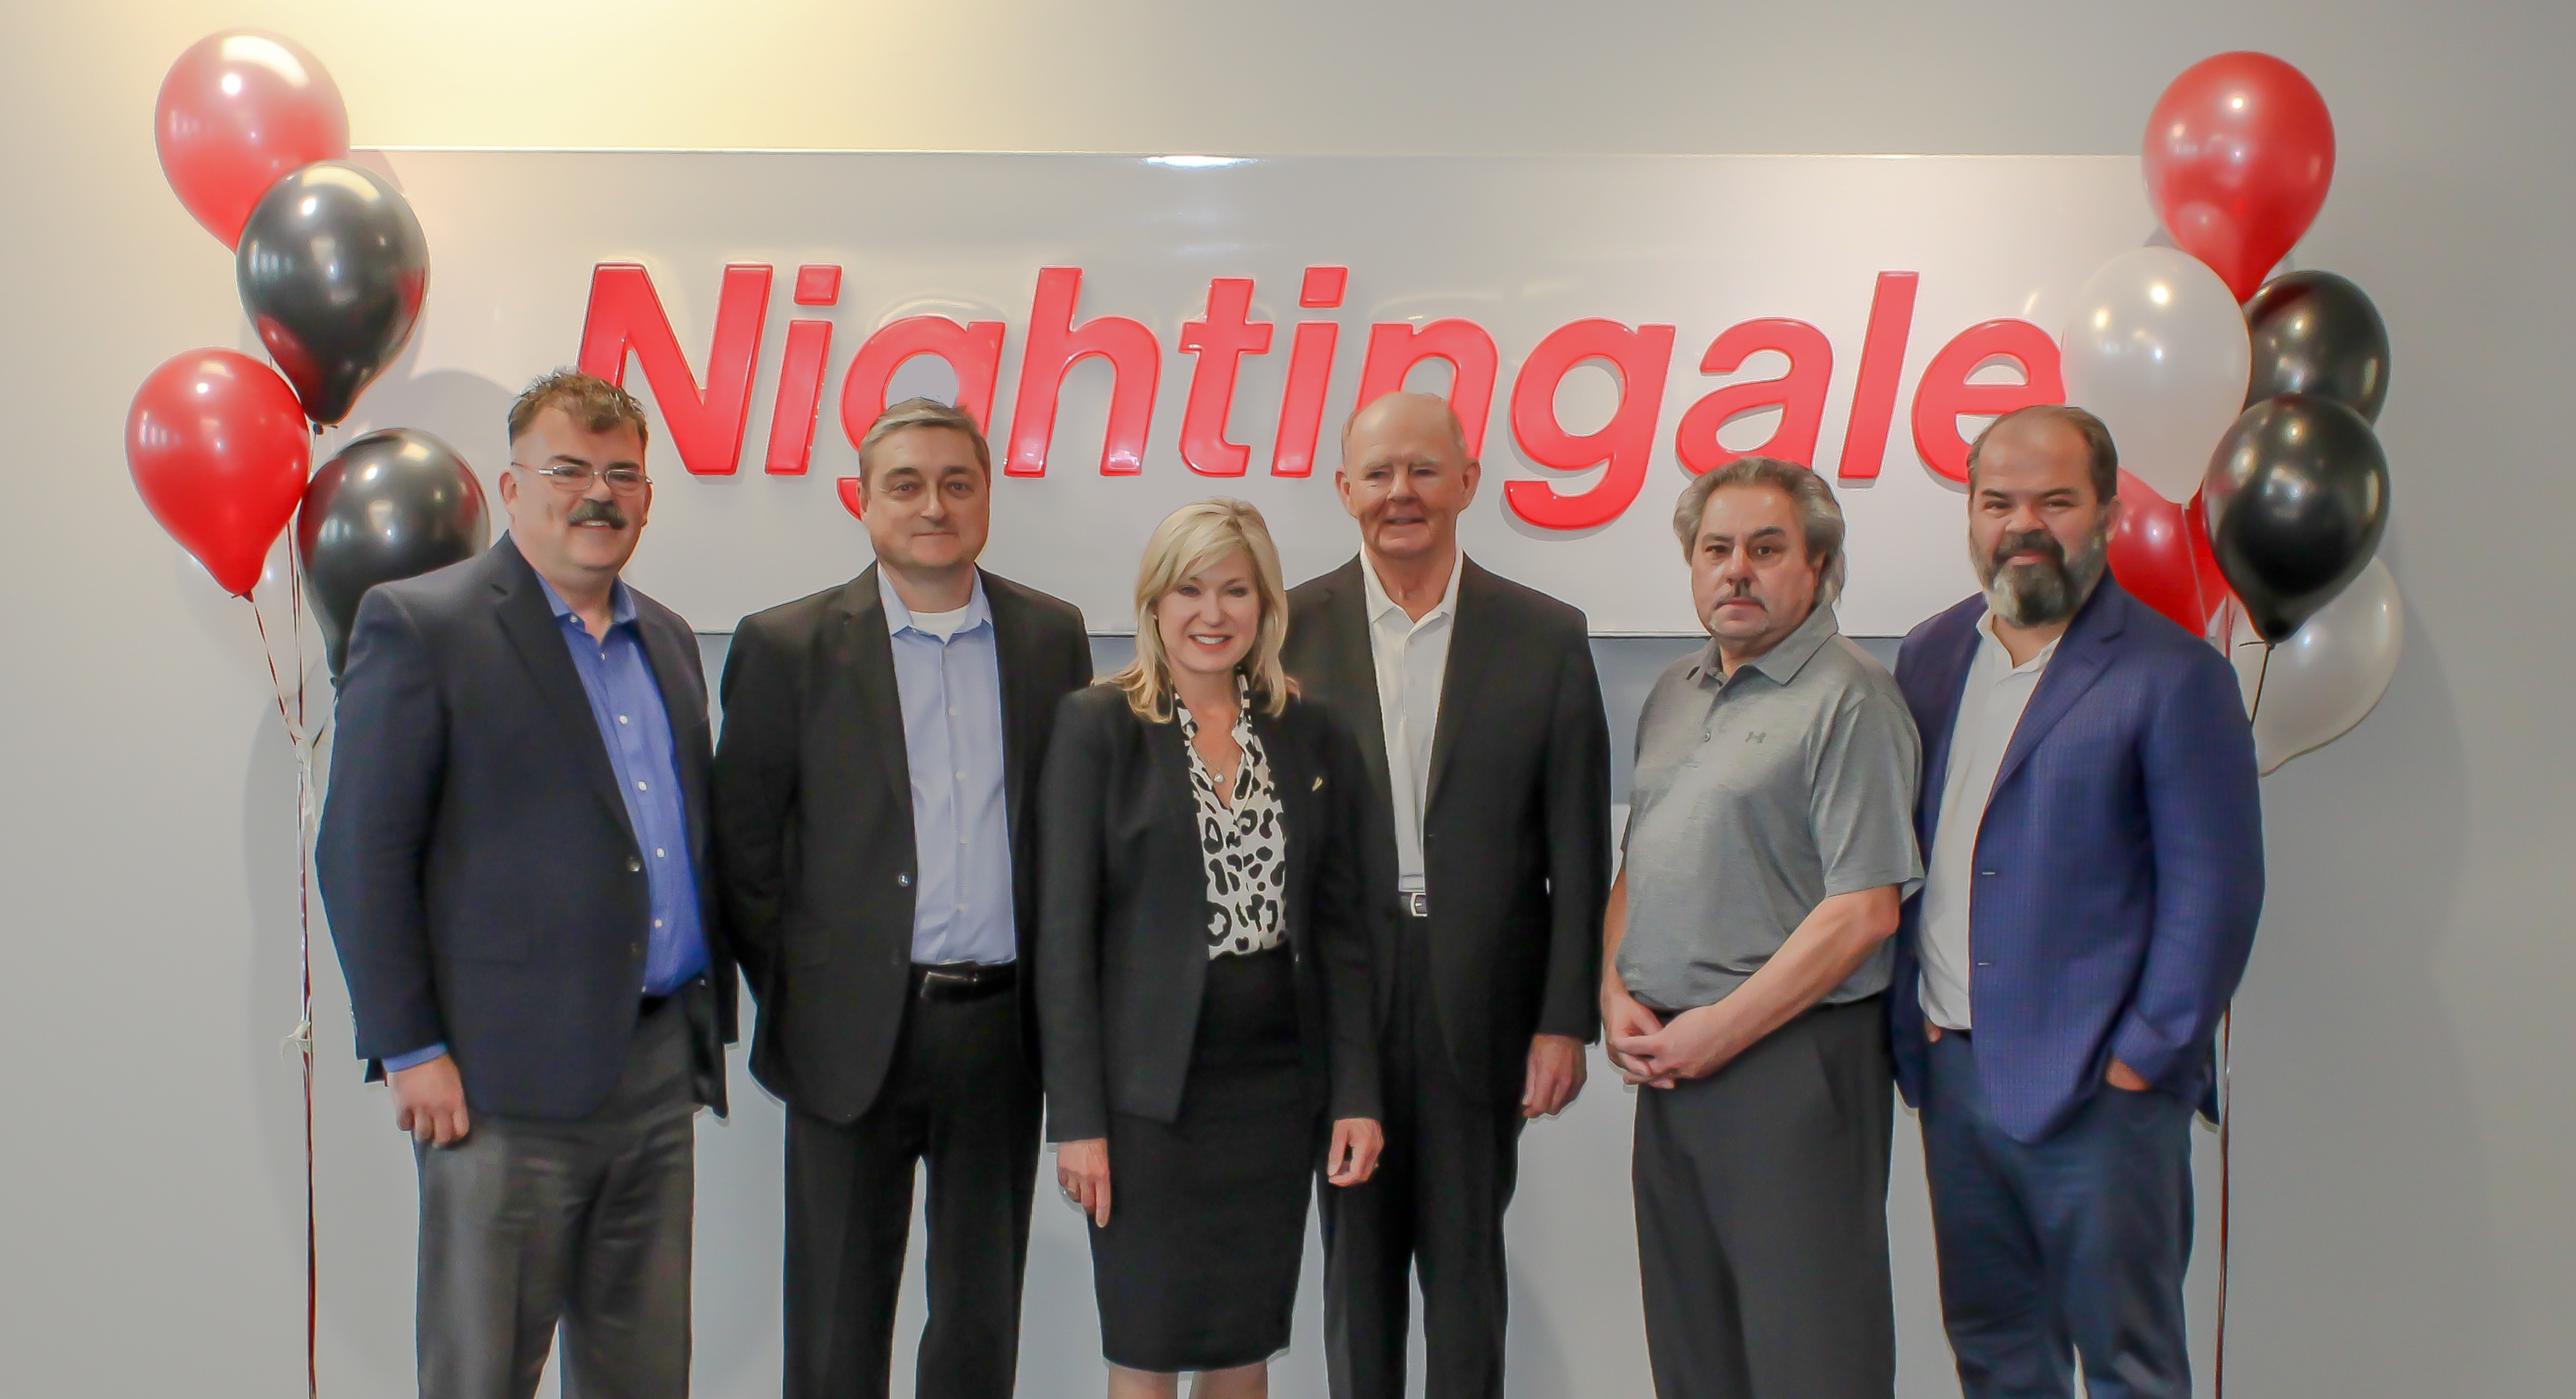 Mayor Crombie and the Nightingale Corp Management Team 